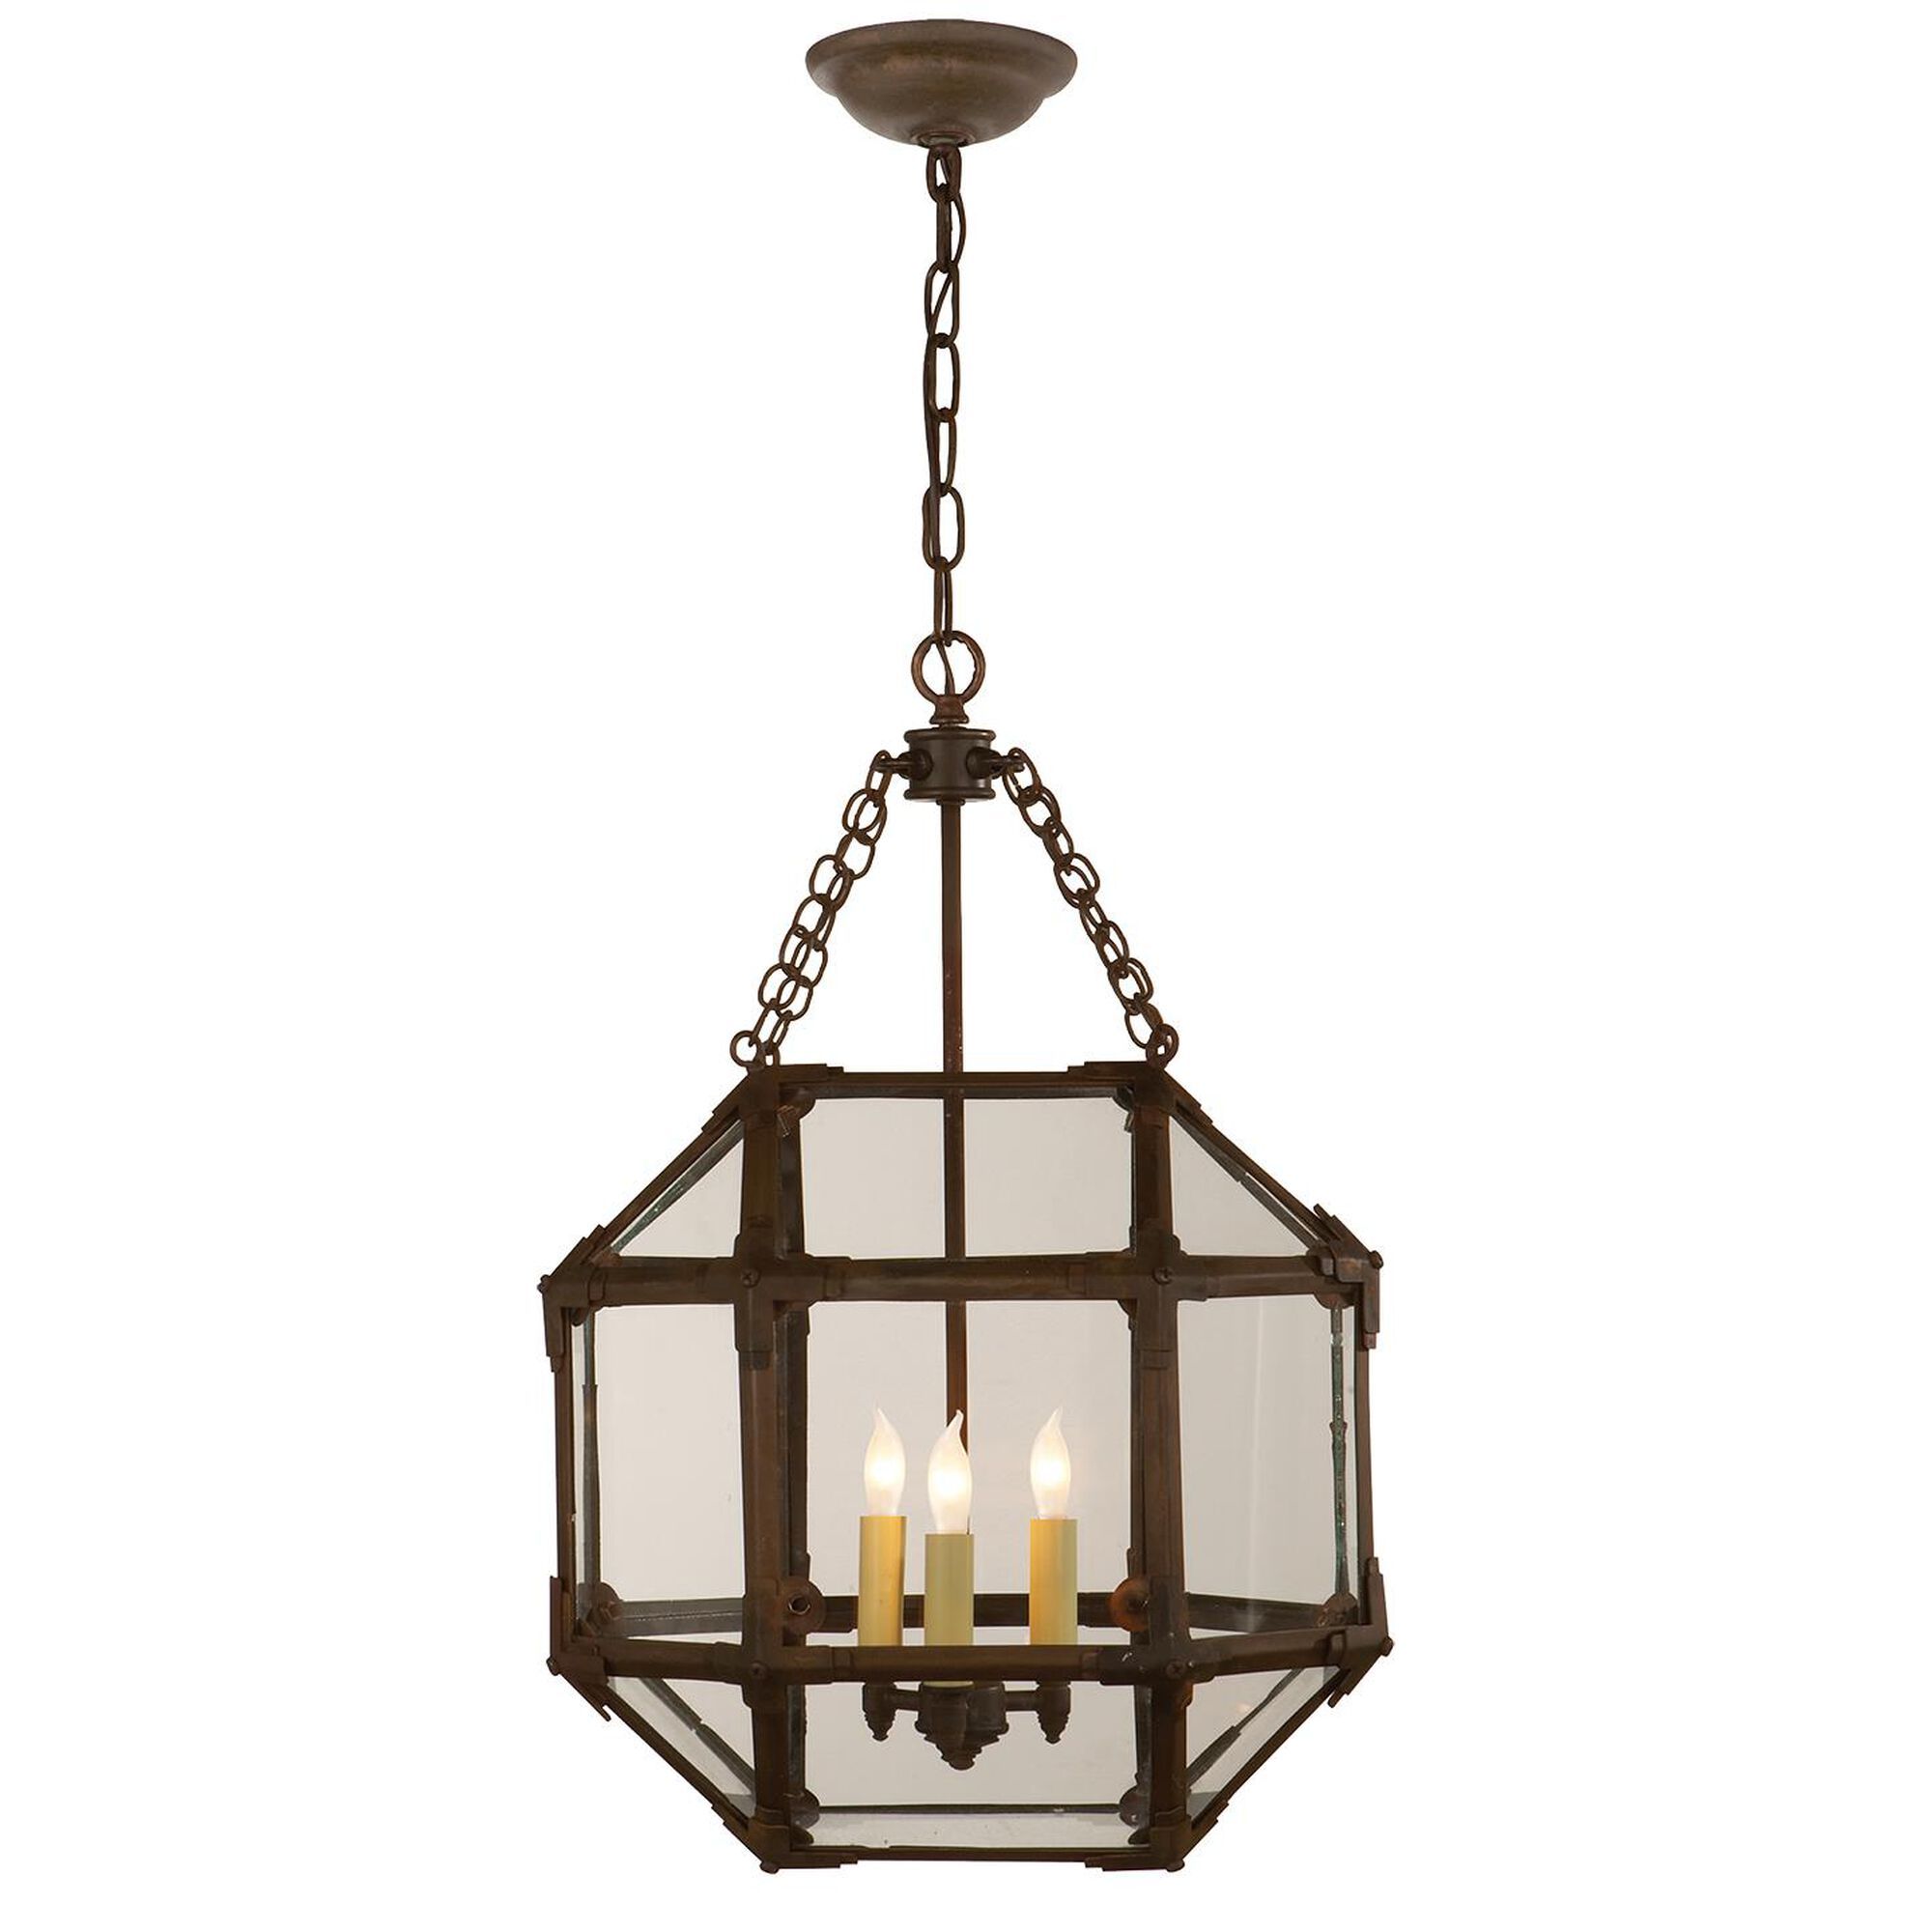 Suzanne Kasler Morris 13 Inch Cage Pendant by Visual Comfort and Co. | Capitol Lighting 1800lighting.com